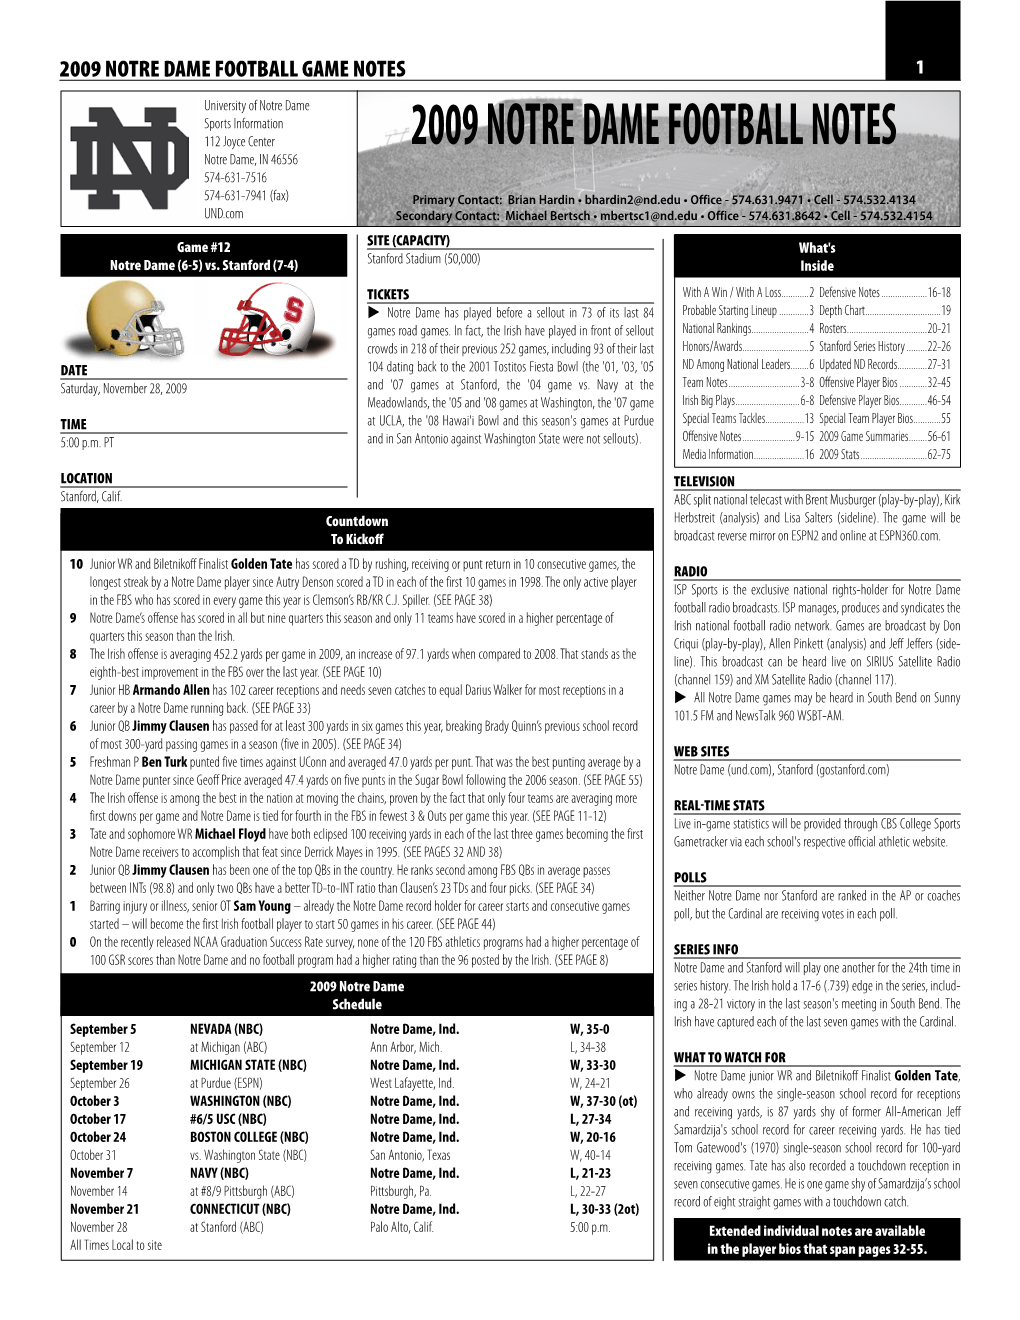 2009 Notre Dame Football Notes